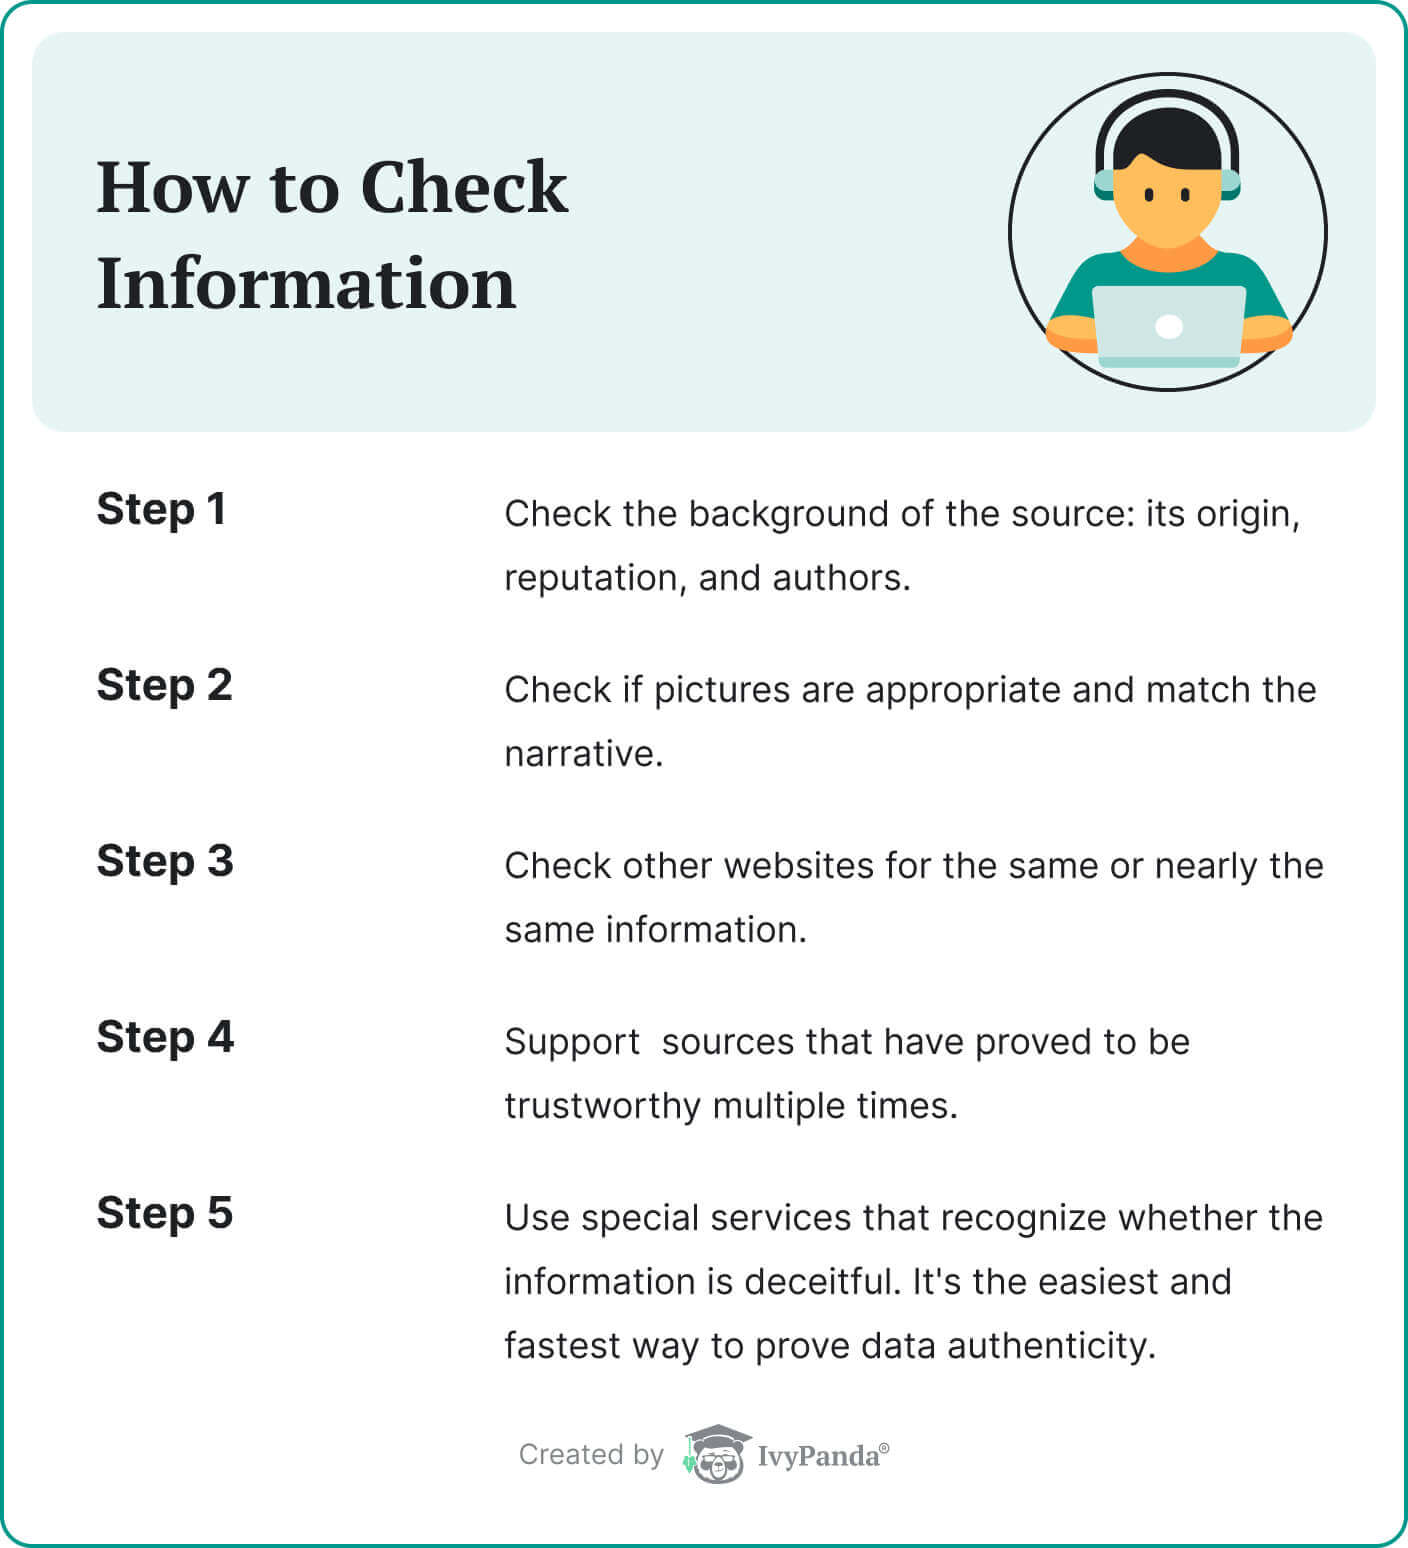 The picture provides a 5-step guide on how to check information. 